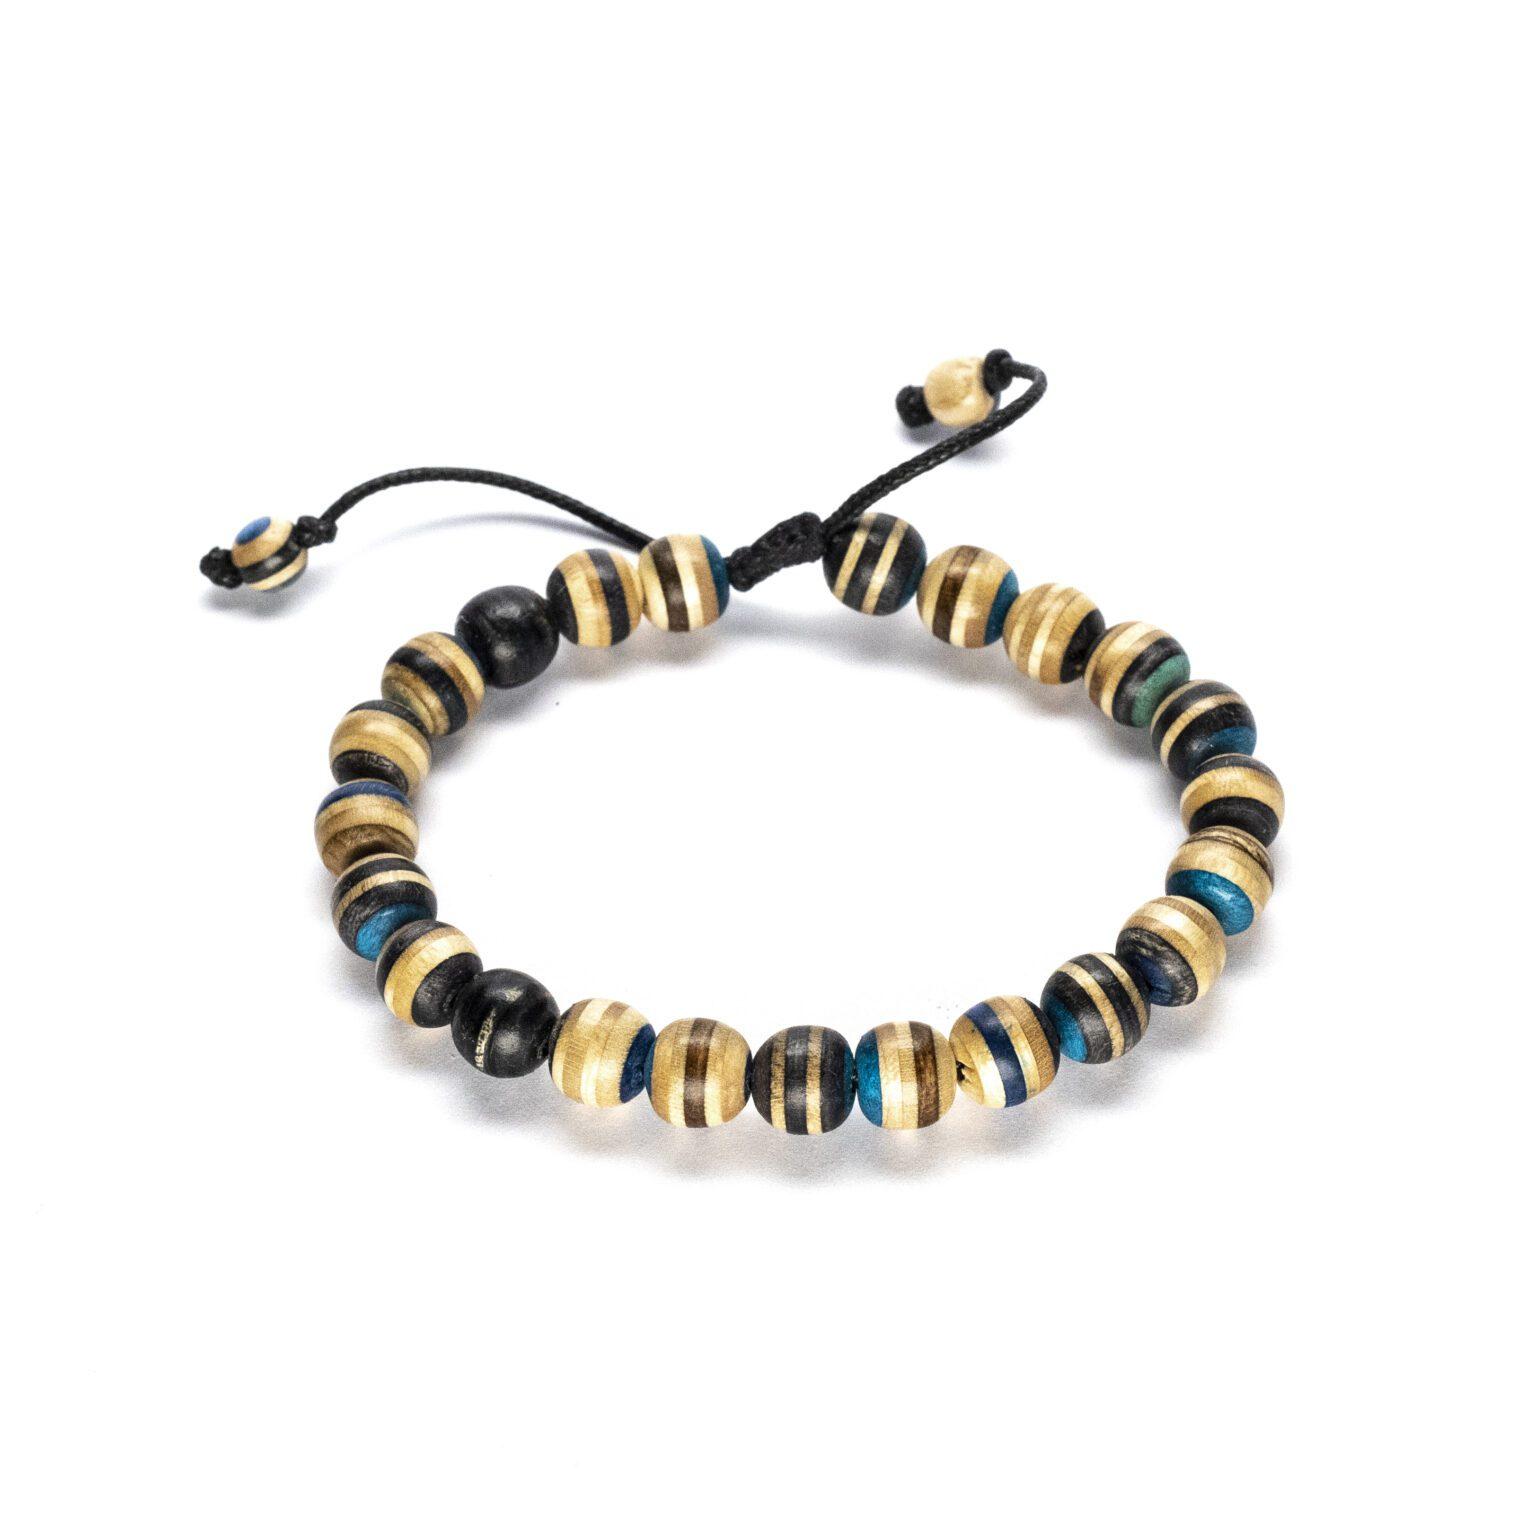 Blue Wood beads bracelet from Recycled Skateboards